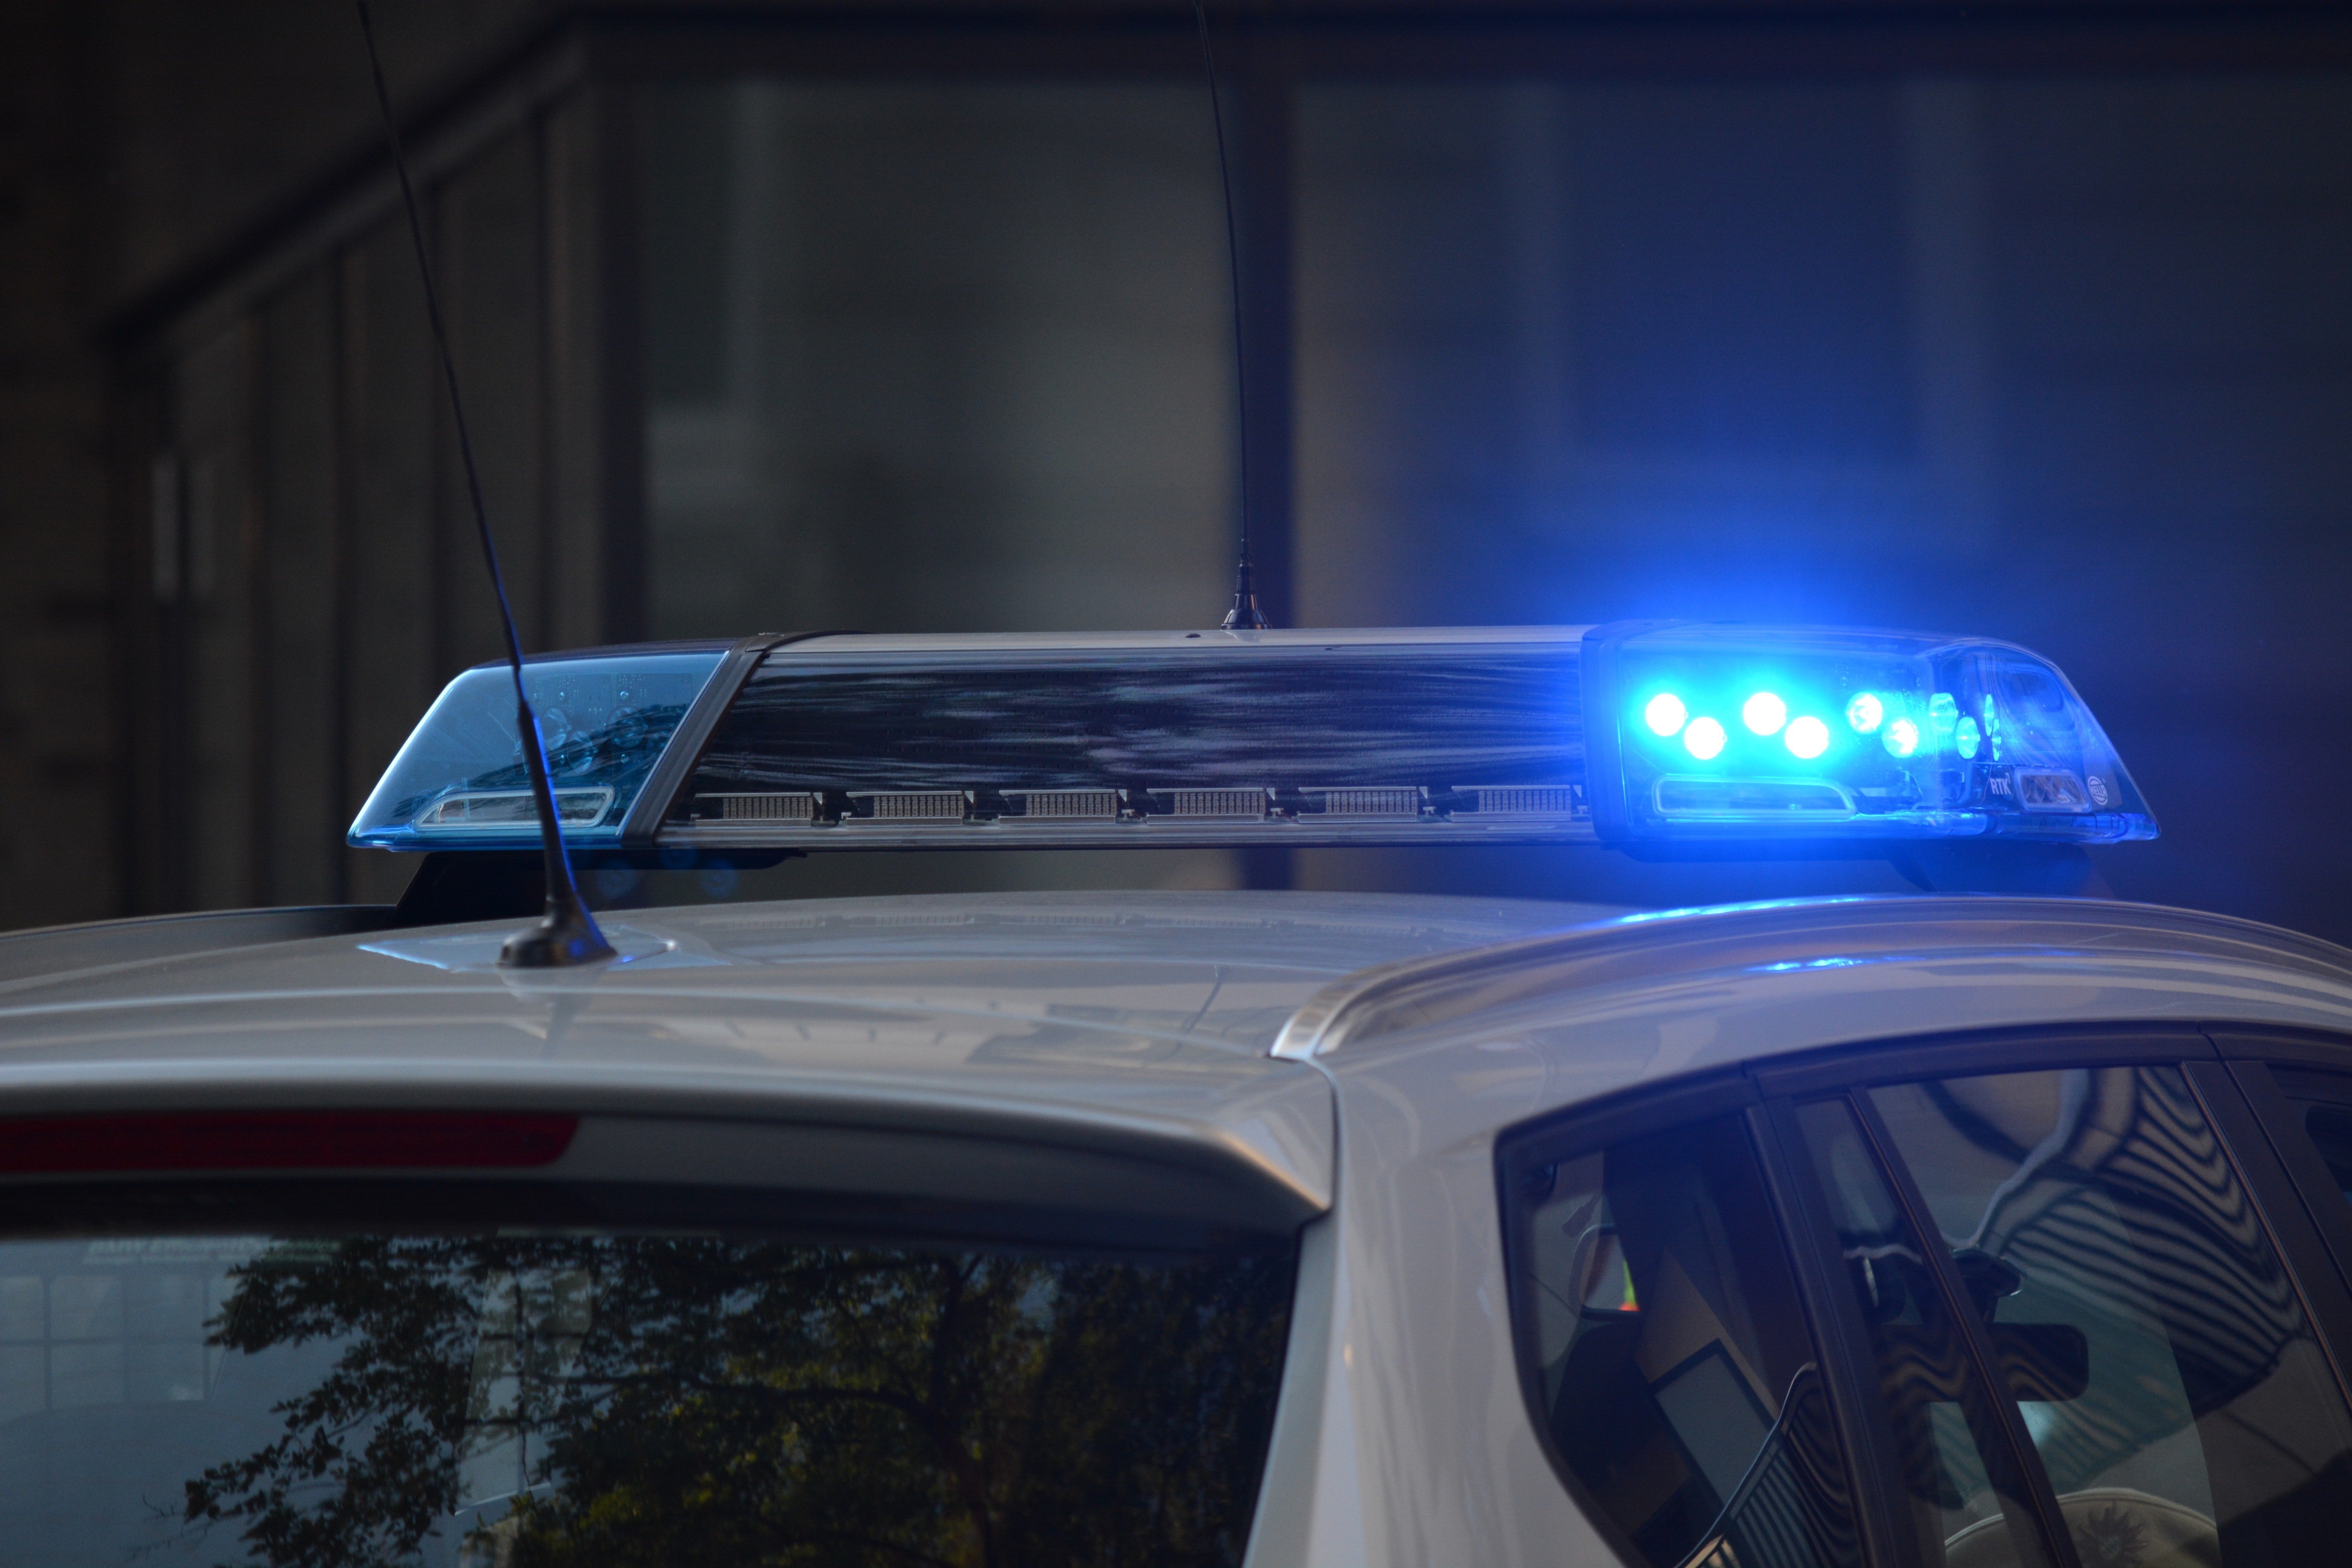 A police car with sirens on. | Source: Pexels